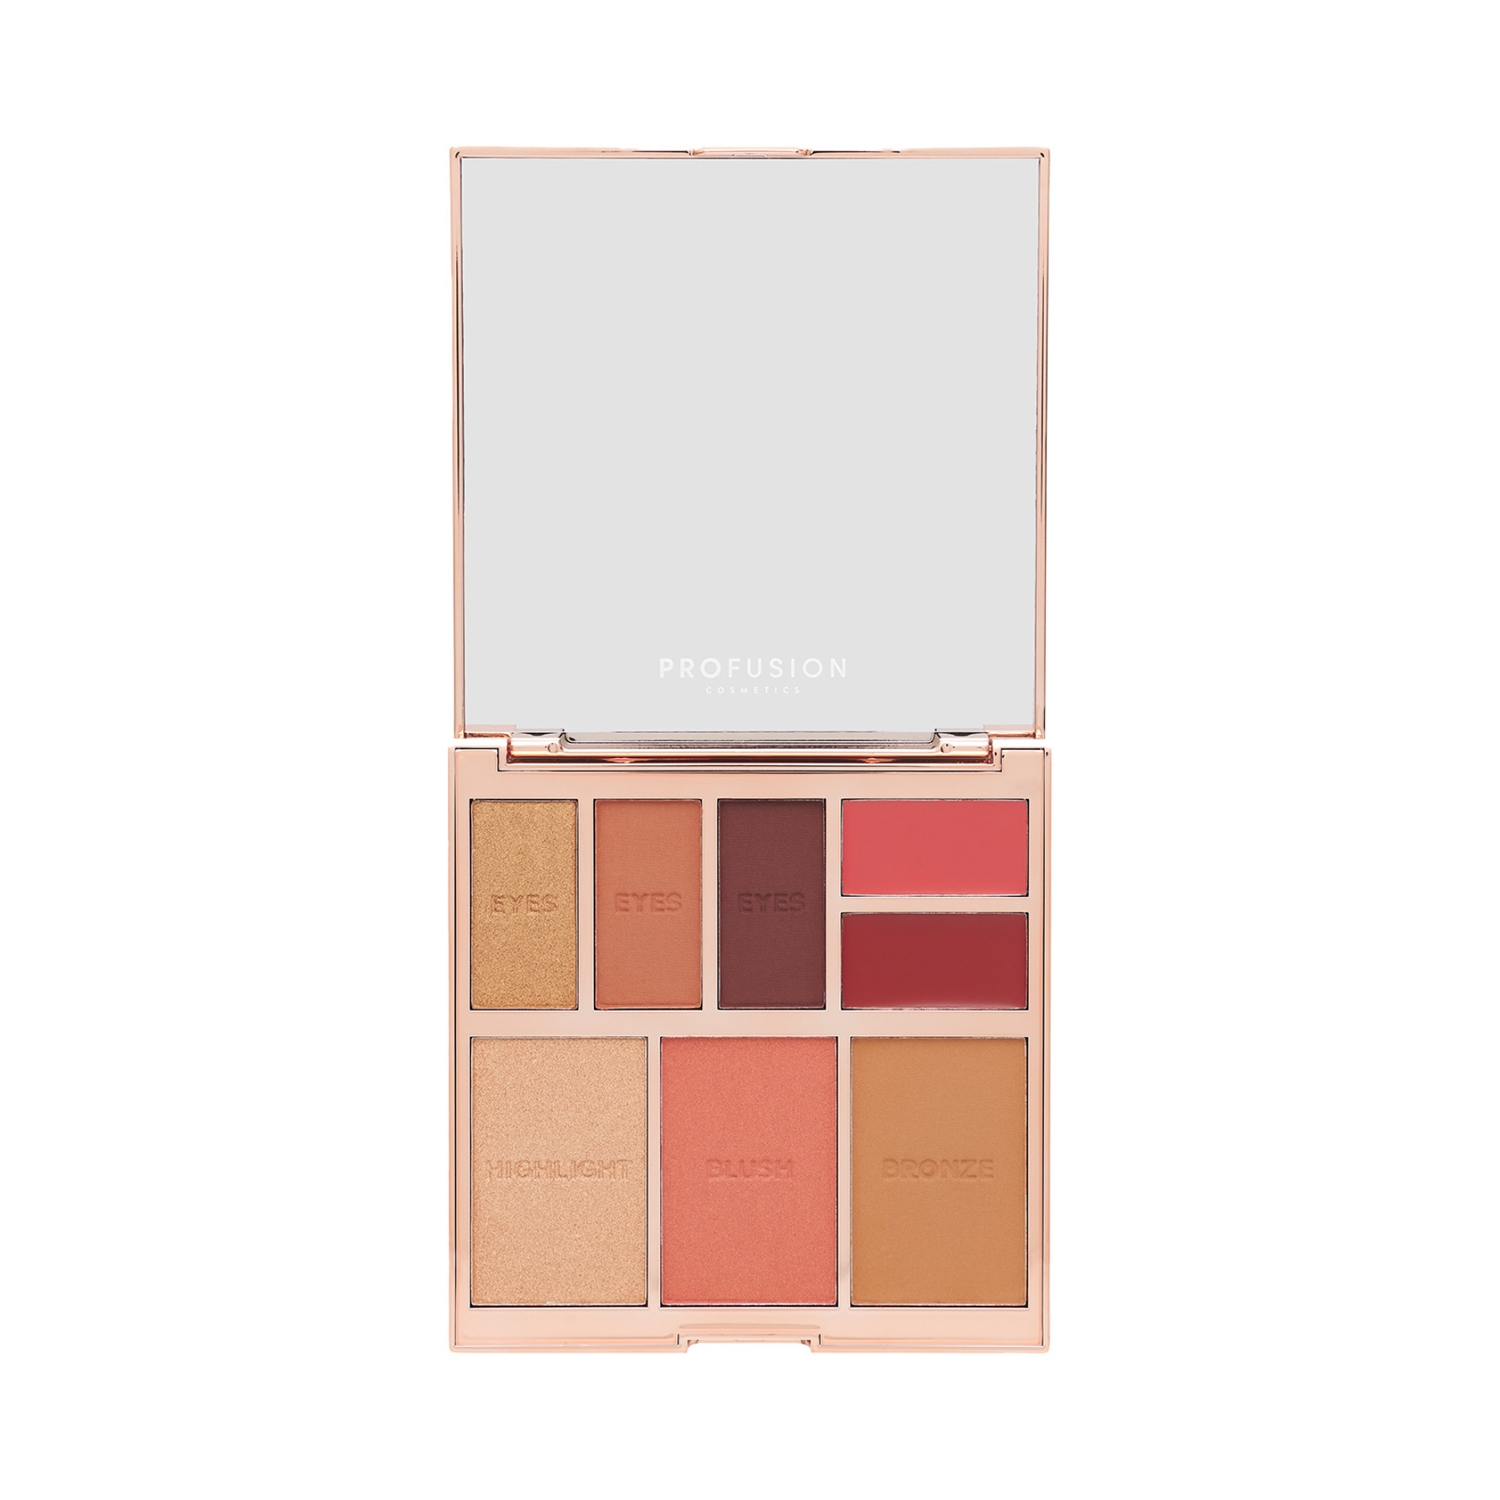 Profusion Cosmetics | Profusion Cosmetics 8 Colour Eye Face & Lip Palette Full Face - Radiance (22.1g)